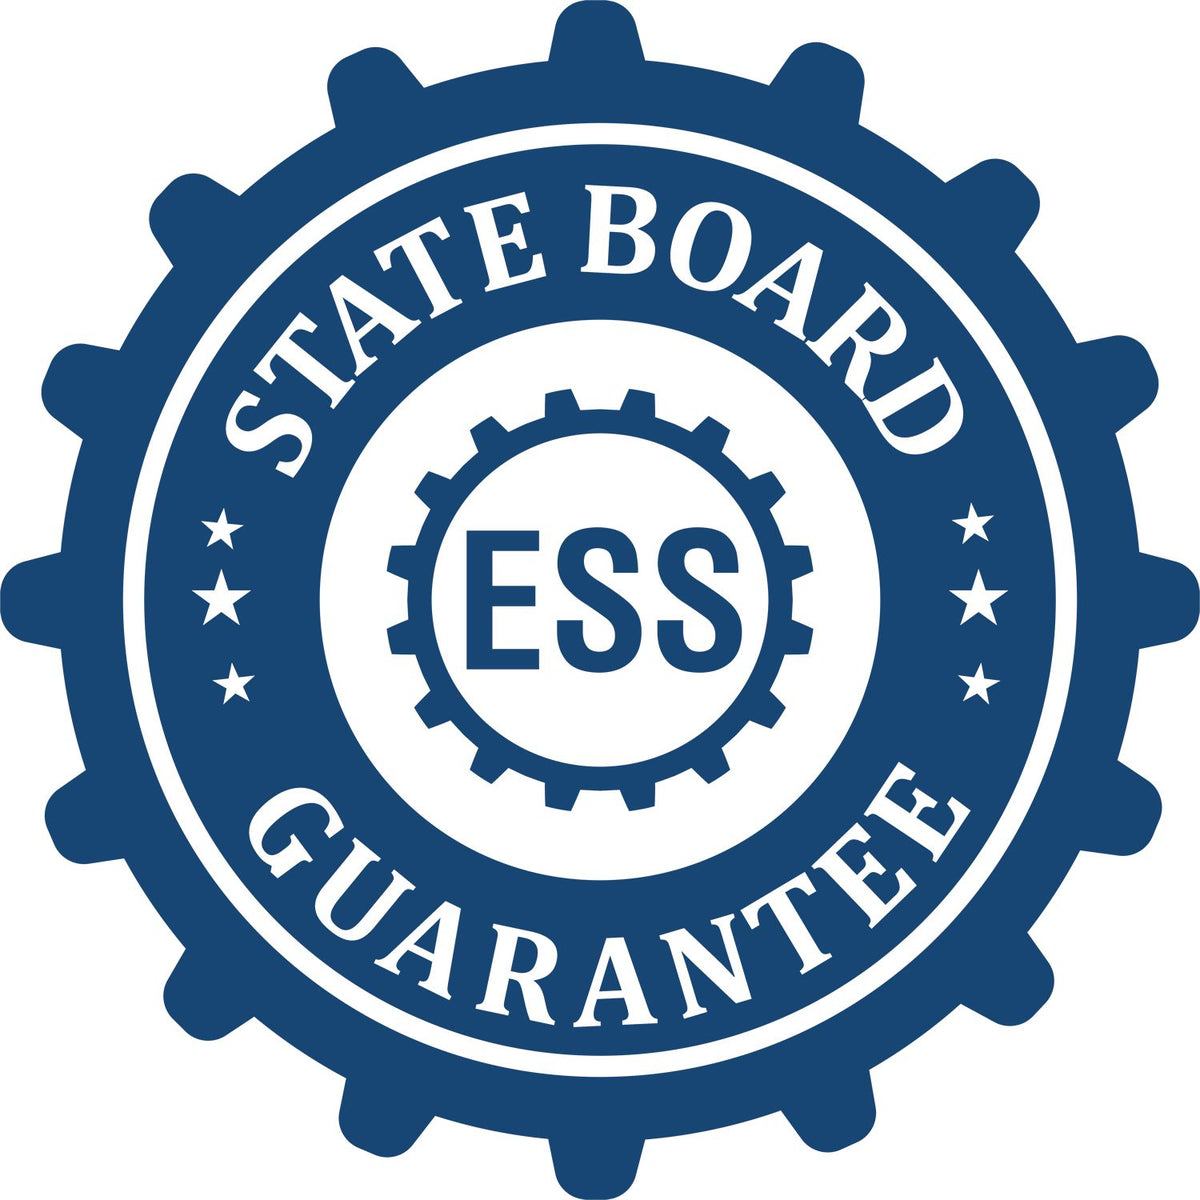 An emblem in a gear shape illustrating a state board guarantee for the Wooden Handle Montana State Seal Notary Public Stamp product.